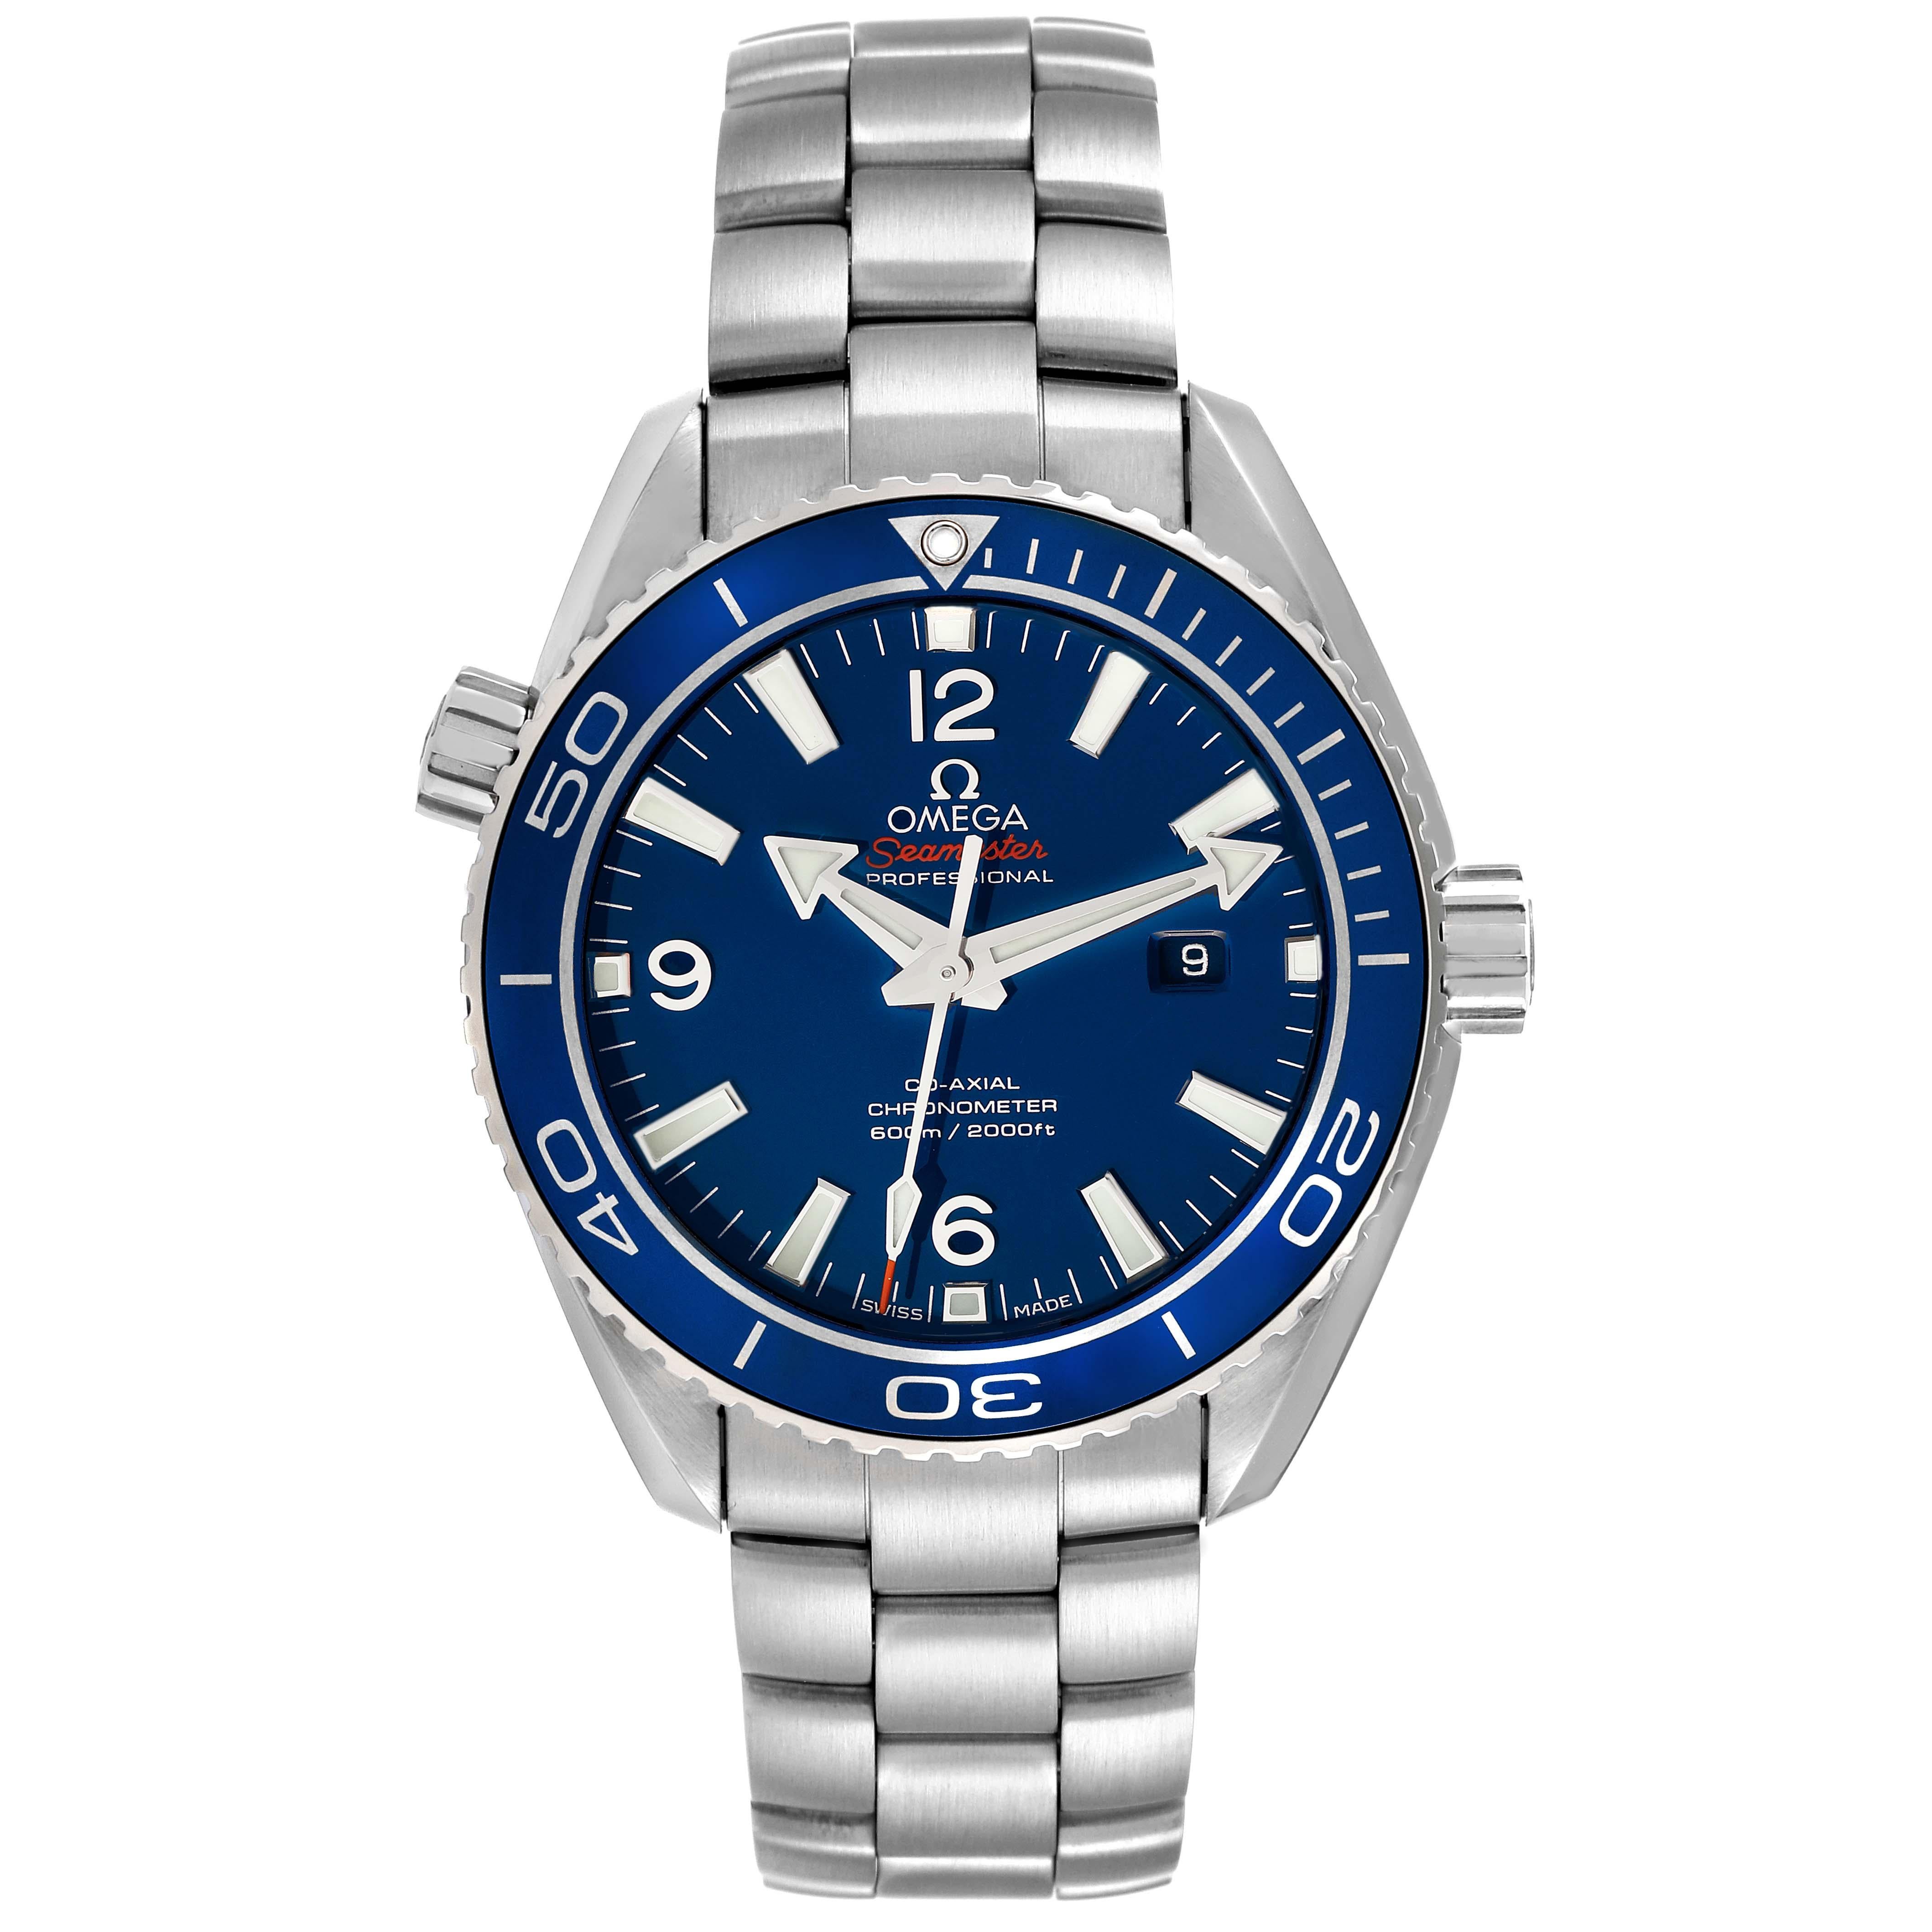 Omega Seamaster Planet Ocean Titanium Mens Watch 232.90.38.20.03.001 Box Card. Automatic self-winding movement with Co-Axial escapement. Freesprung-balance system with silicon balance-spring. Automatic winding in both directions. Titanium round case